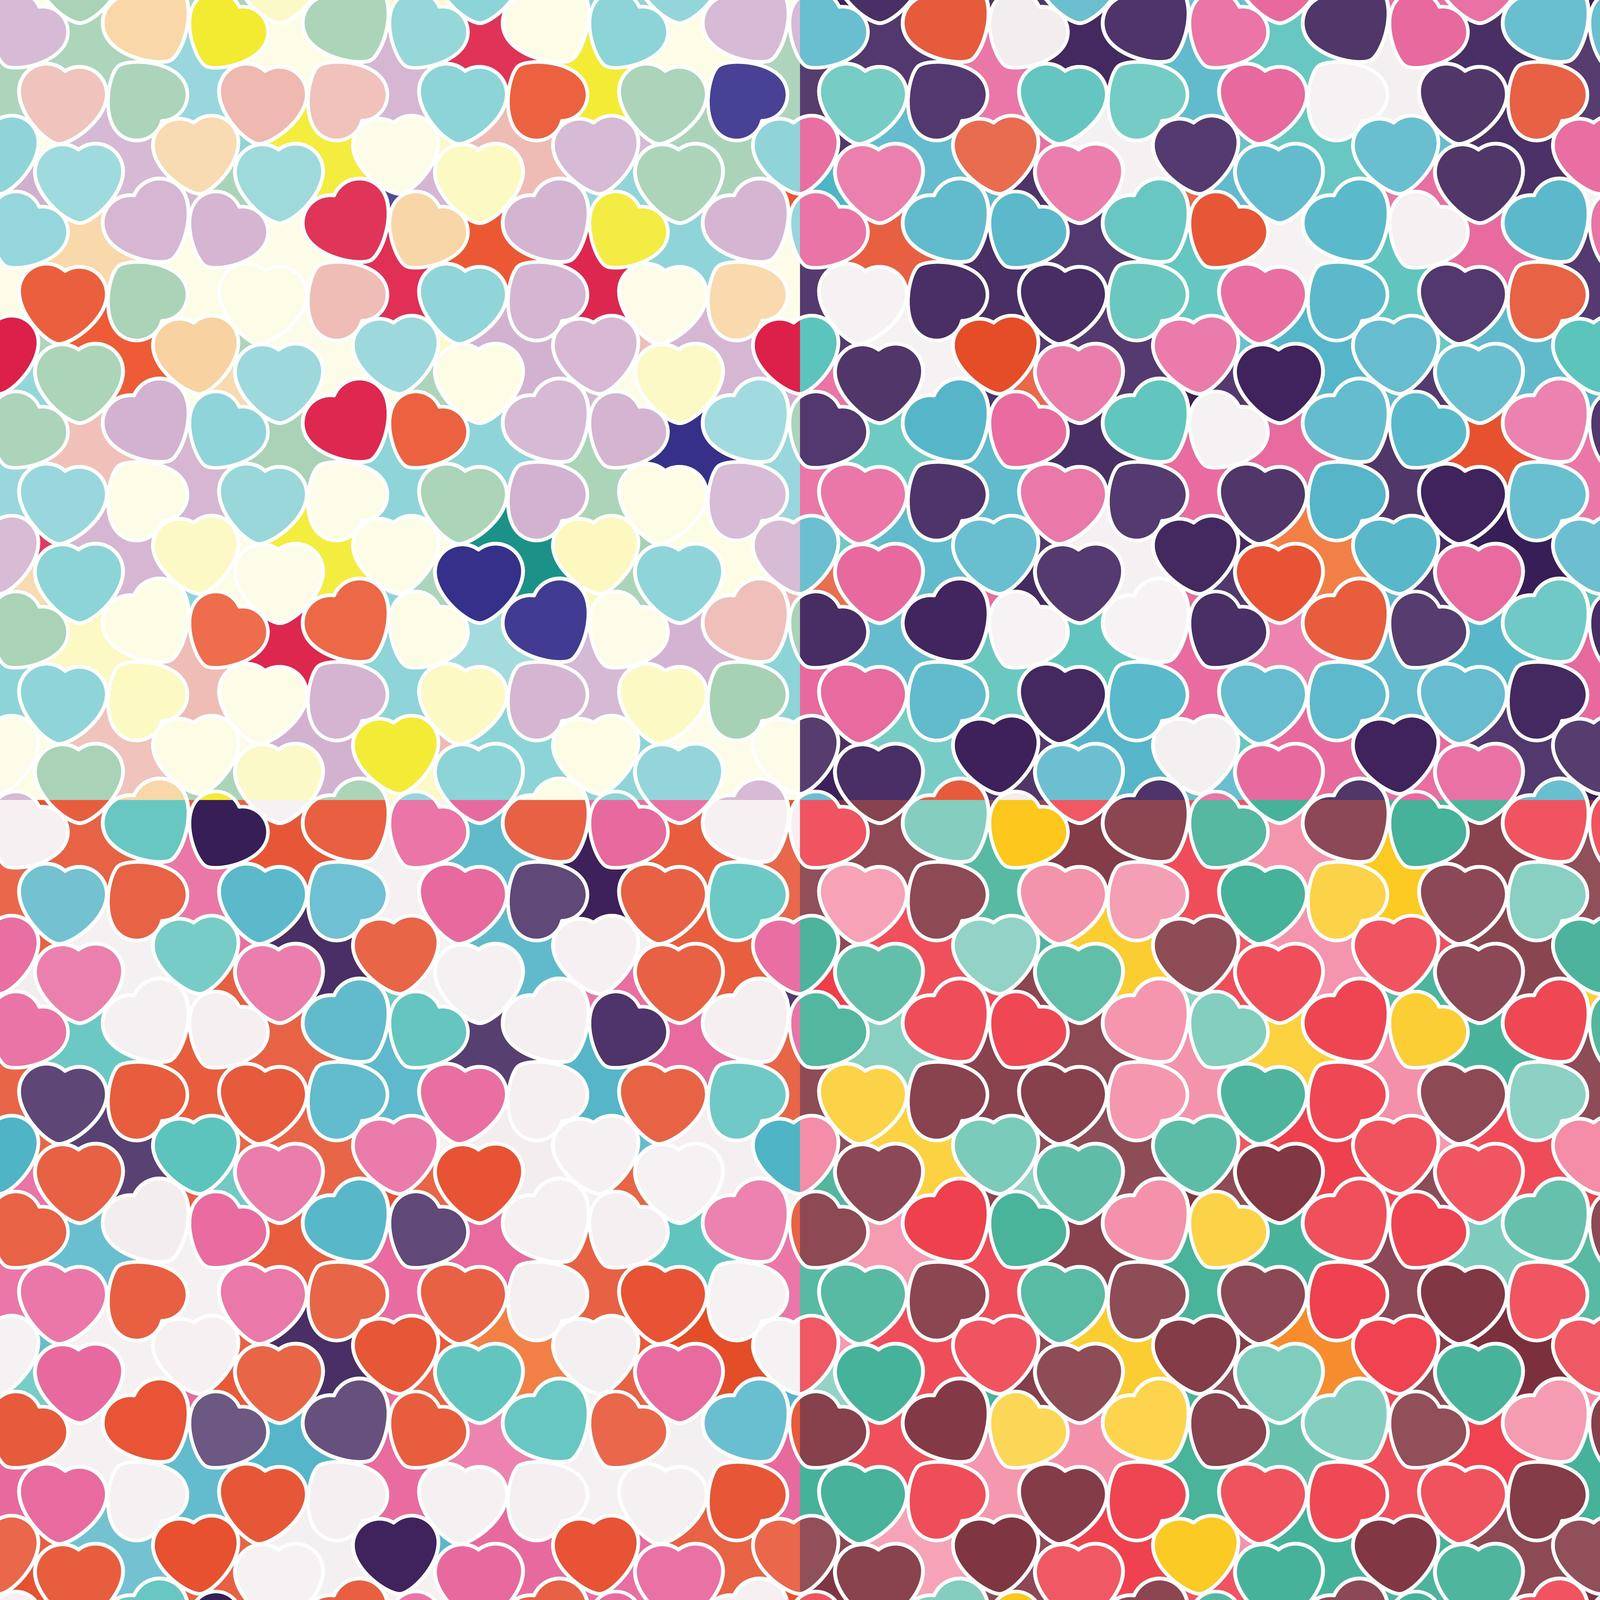 Hearts Seamless Texture by dacascas